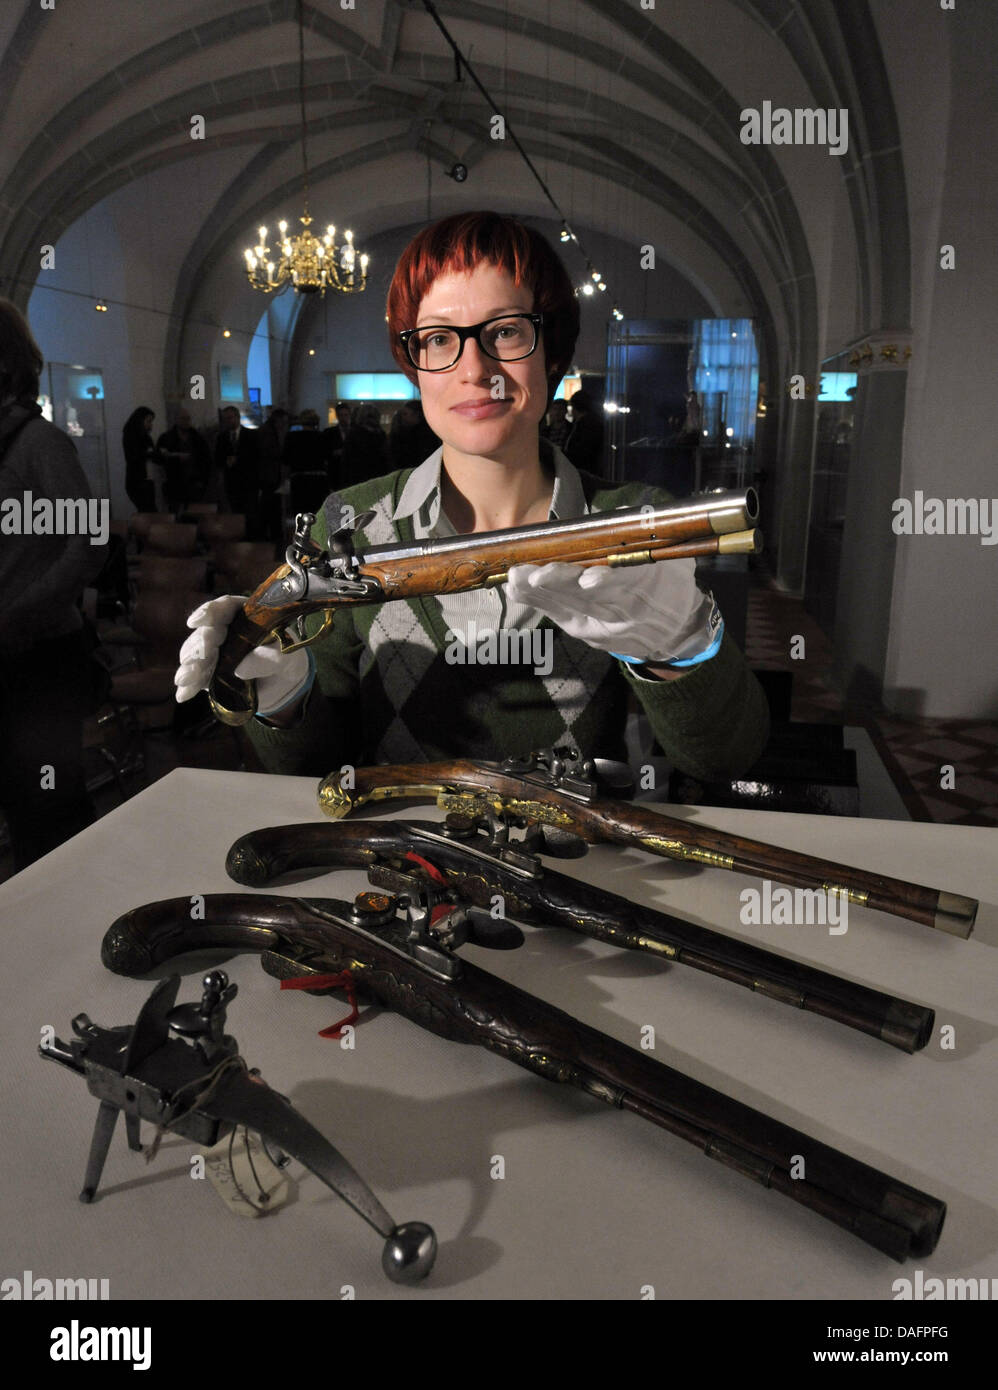 Museum employee Kathrin Stern presents an antique pistol from the 18th century of the arsenal of the Schwarzburg princes at Heidecksburg Palace in Rudolstadt, Germany, 08 December 2011. For four years, 4,000 armaments, harnesses, batons and thrustings had been restored with the help of the Federal Cultural Foundation. The latest restoration of the Schwarzburg arsenal makes it possi Stock Photo